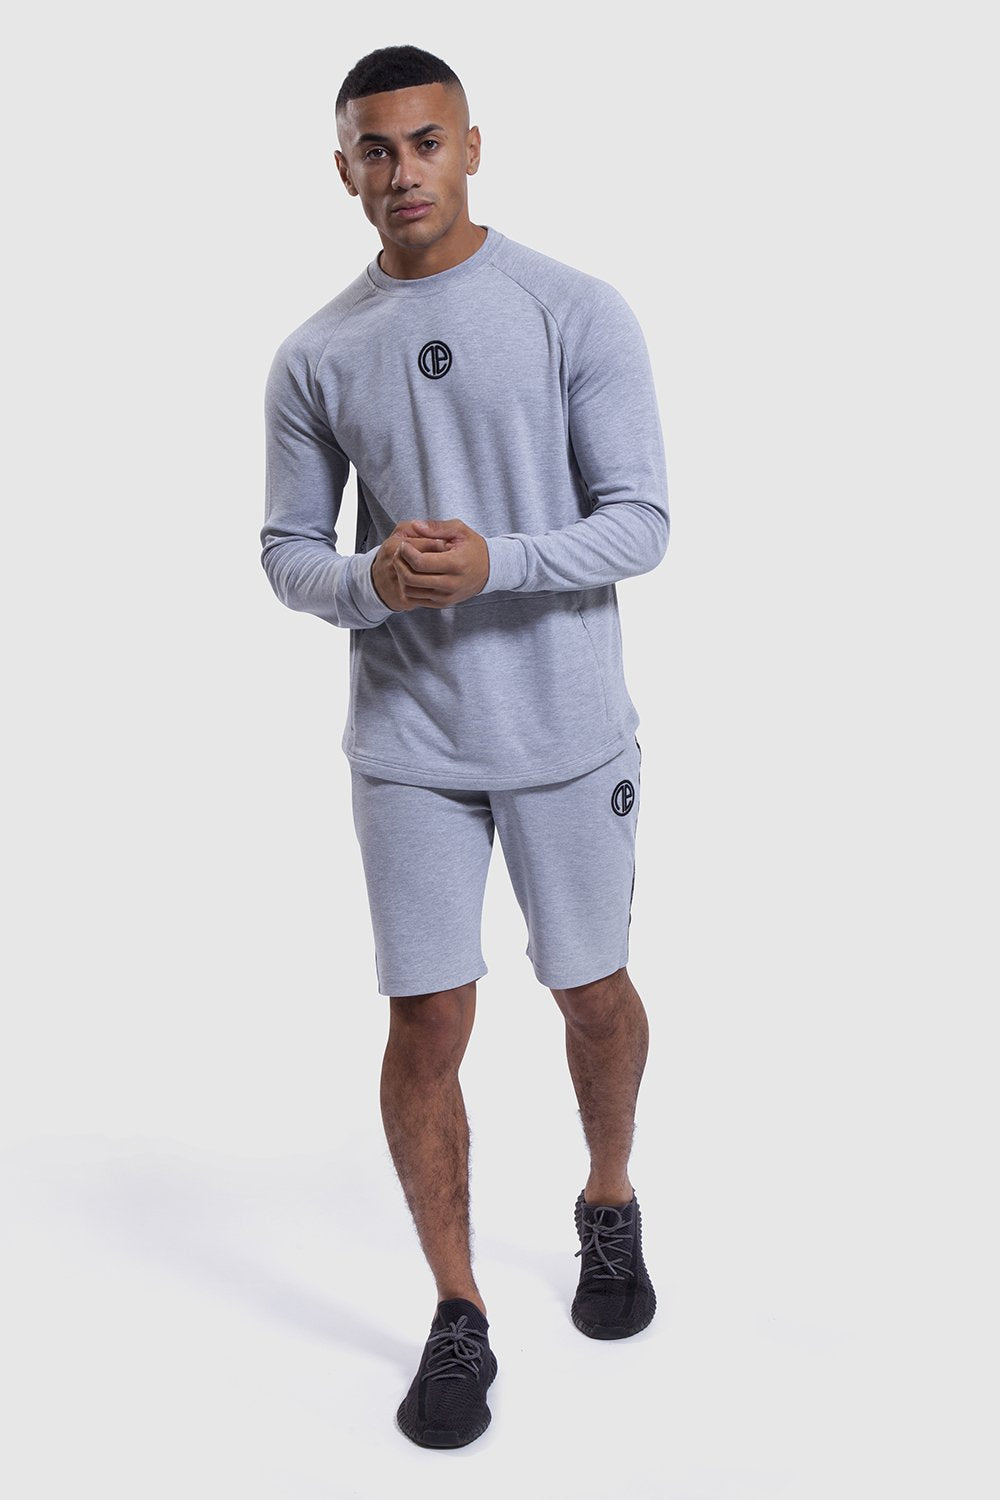 Iverson mens gym shorts and grey long sleeve top